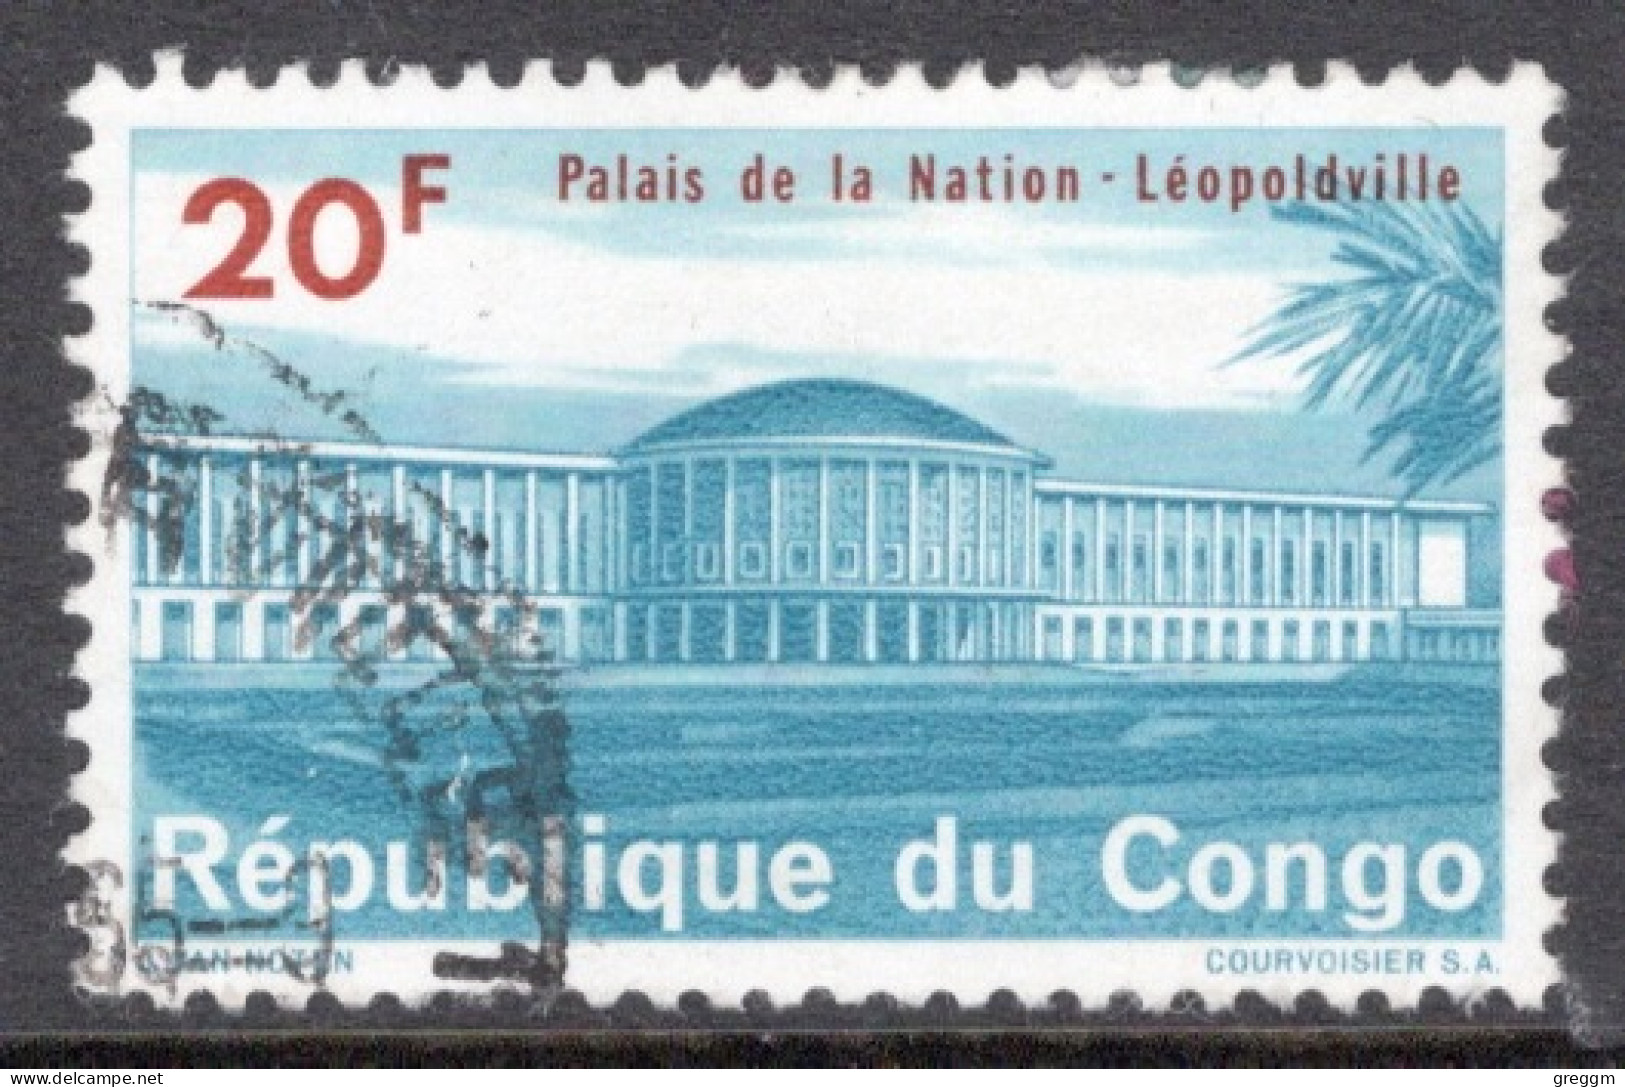 Kinshasa Congo 1964 Single 20f Stamp From The Definitive Set  National Palace, Leopoldville  In Fine Used. - Oblitérés